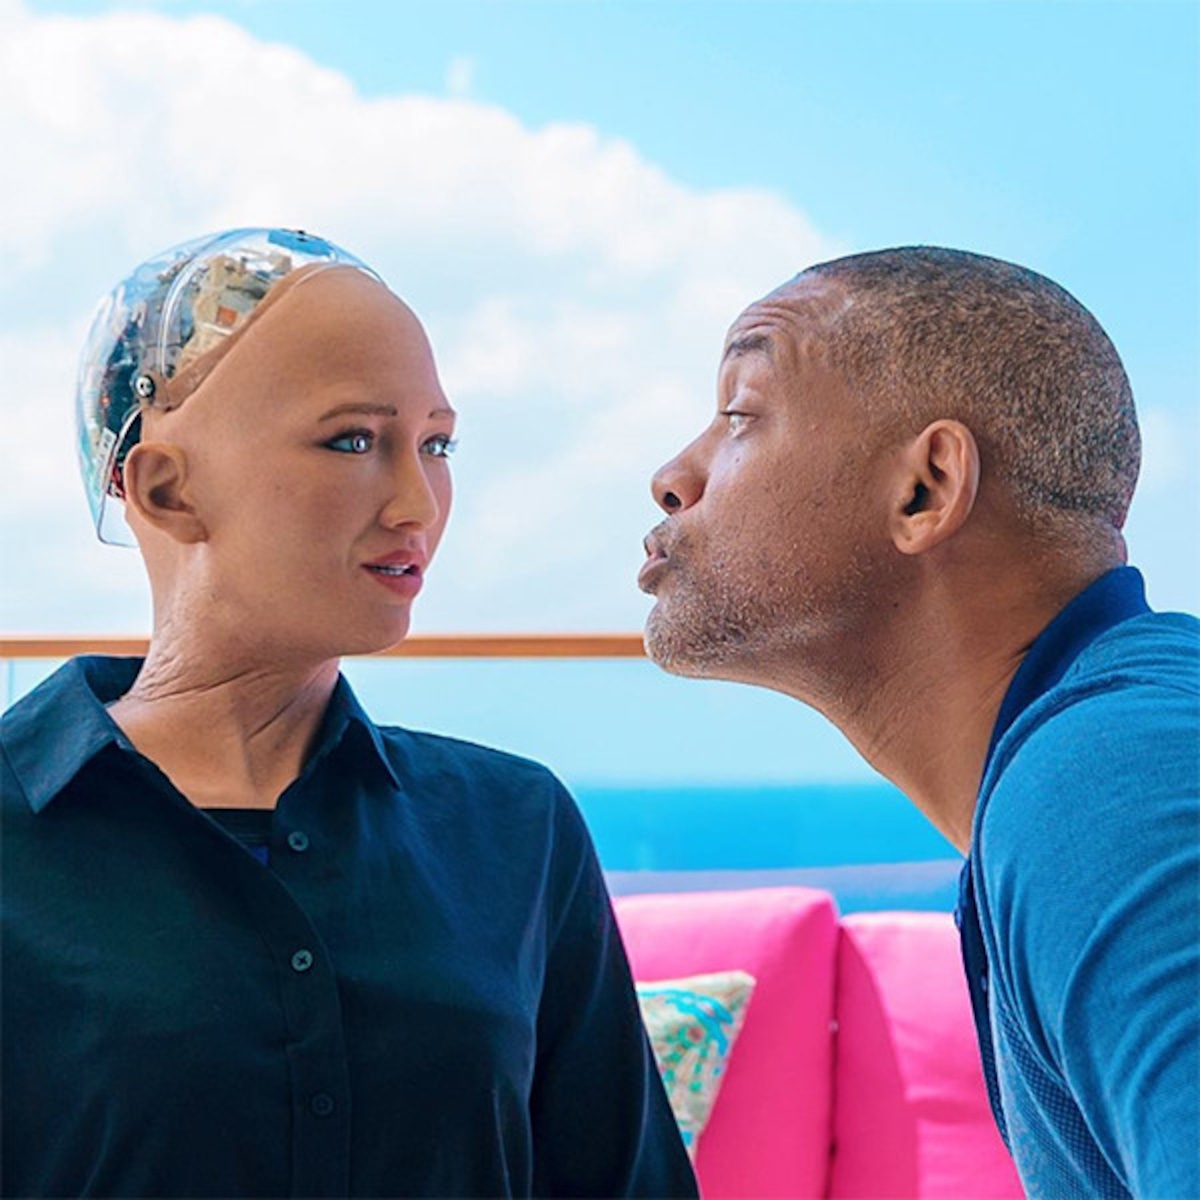 kindben Tegnsætning gave Will Smith's Date With Sophia the Robot Gets Awkward Fast - E! Online